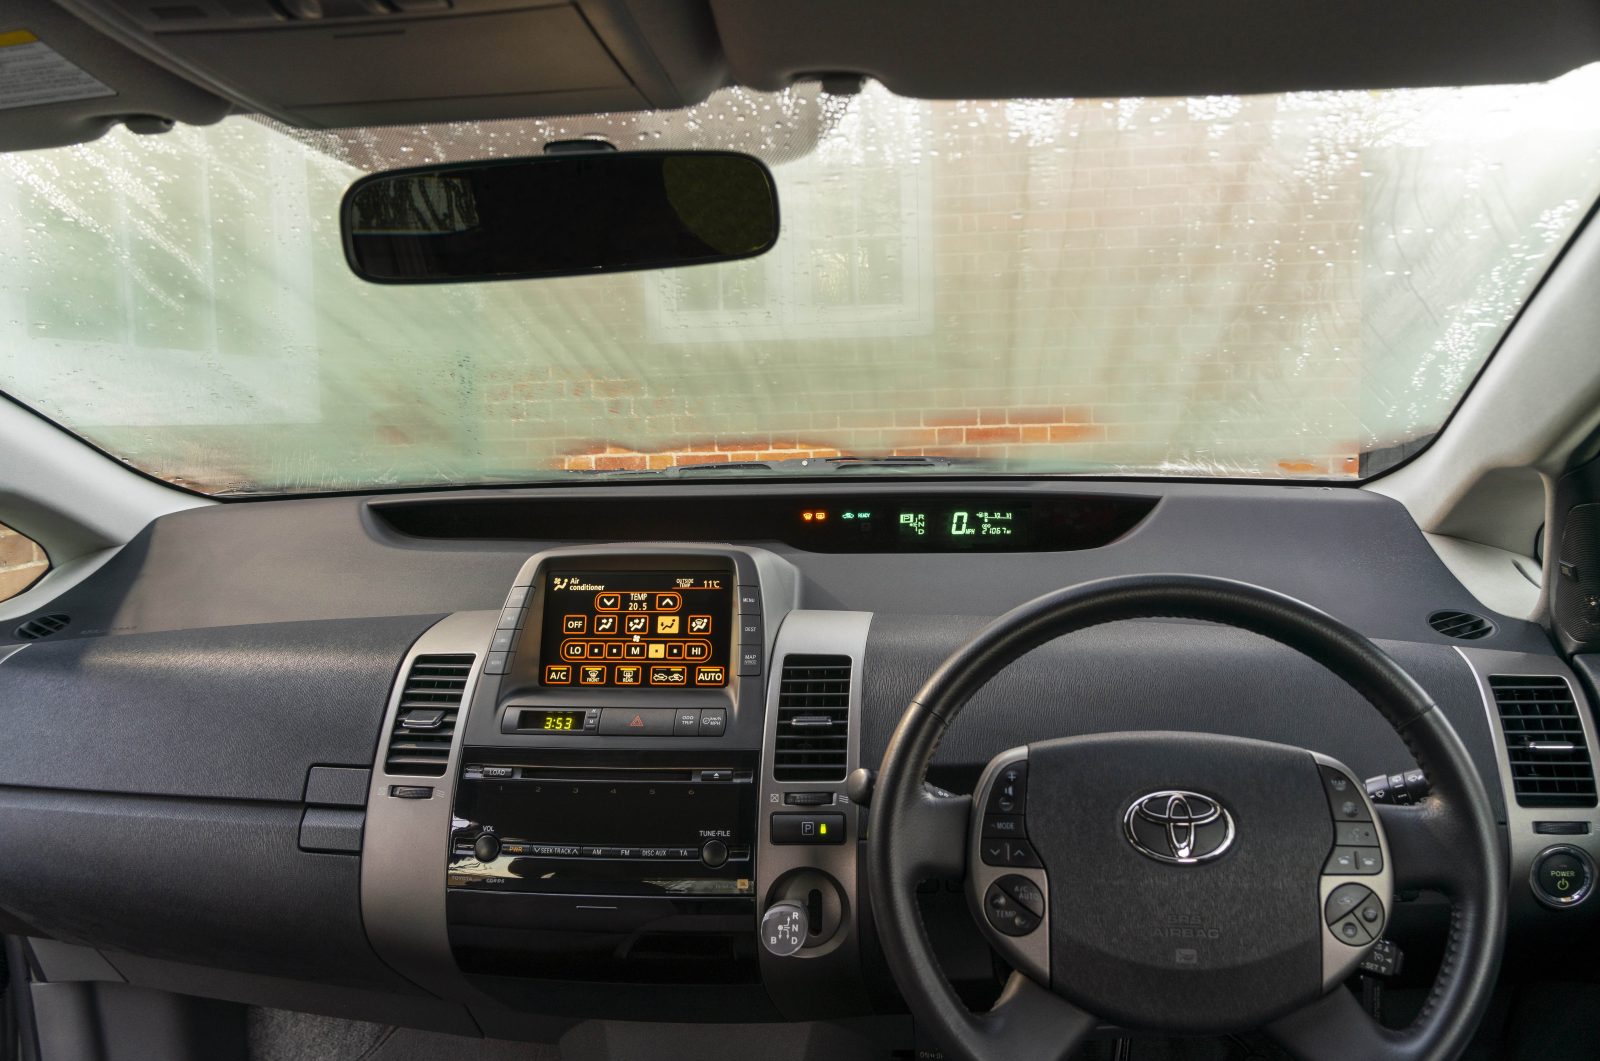 How To Prevent Condensation On Car Windows